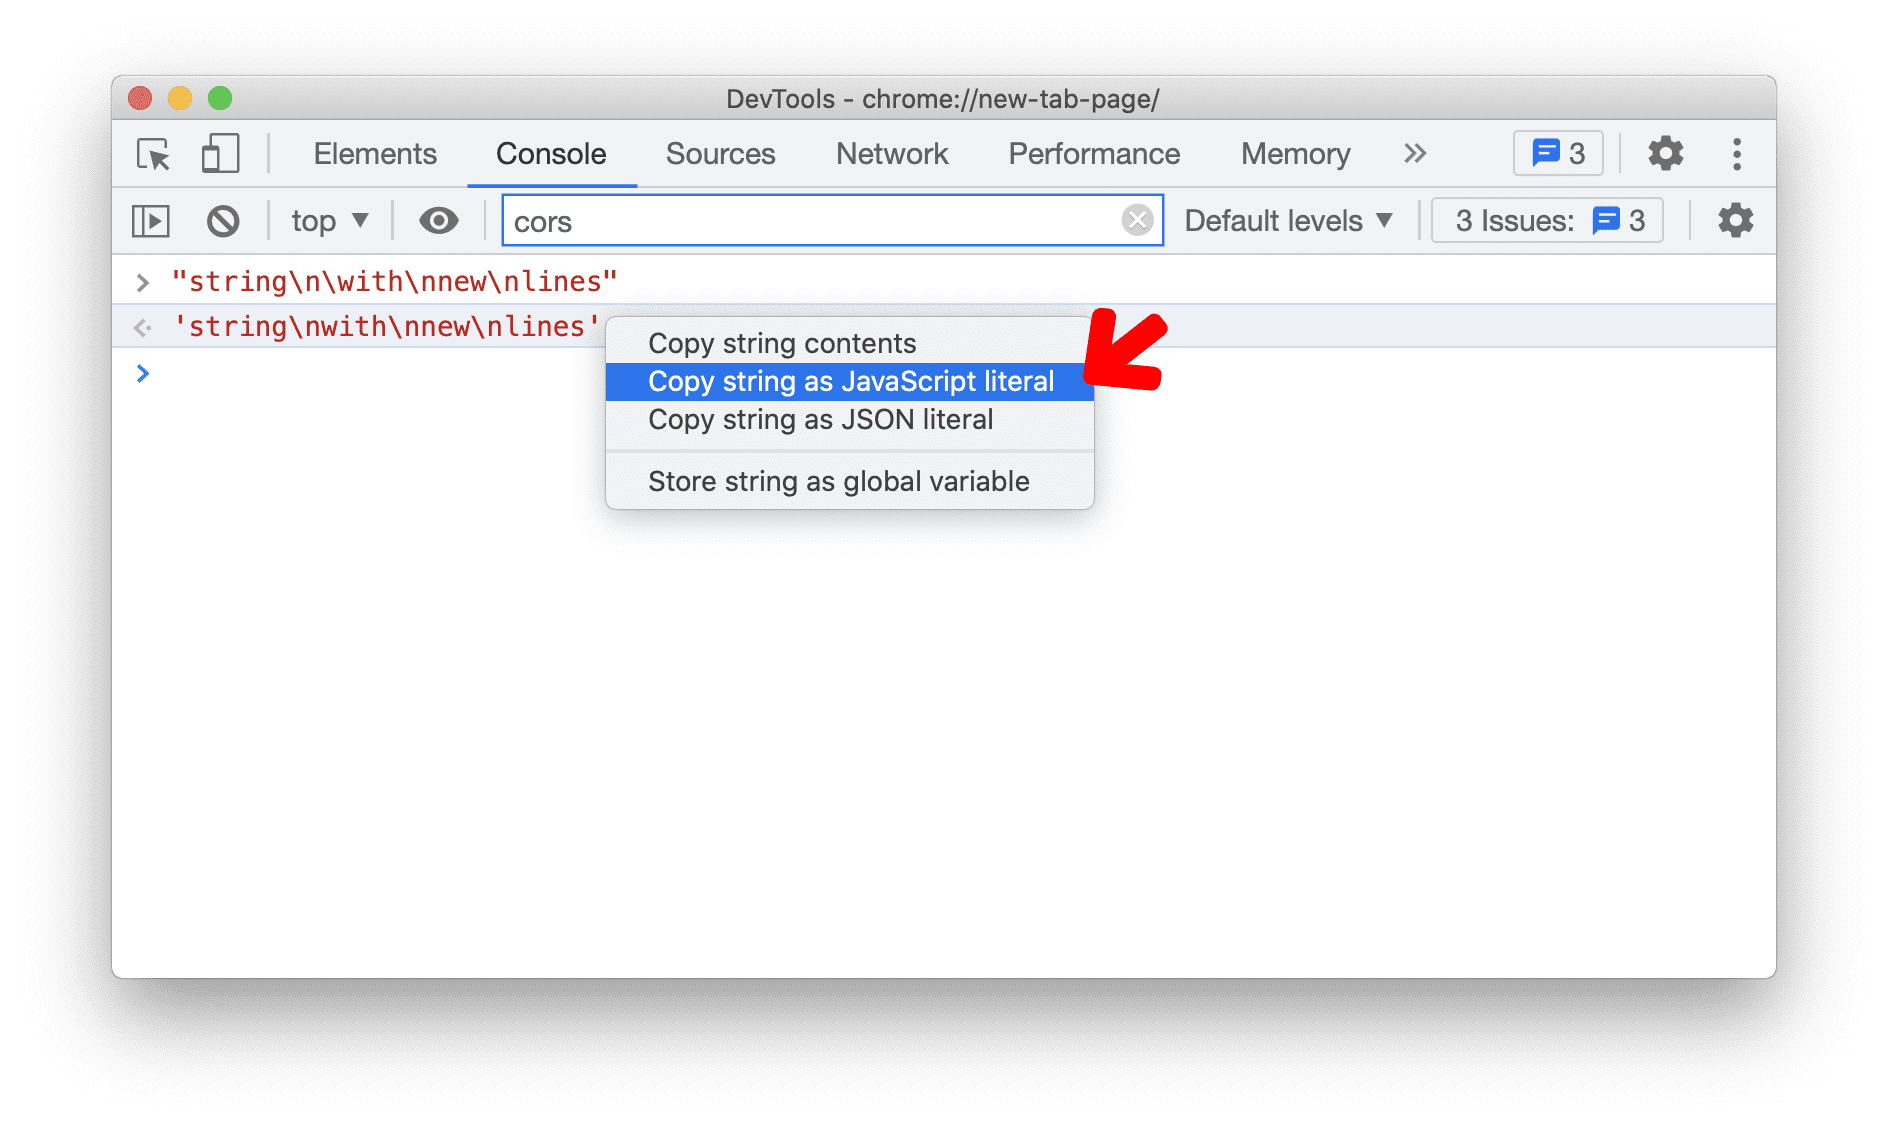 New context menu in the Console